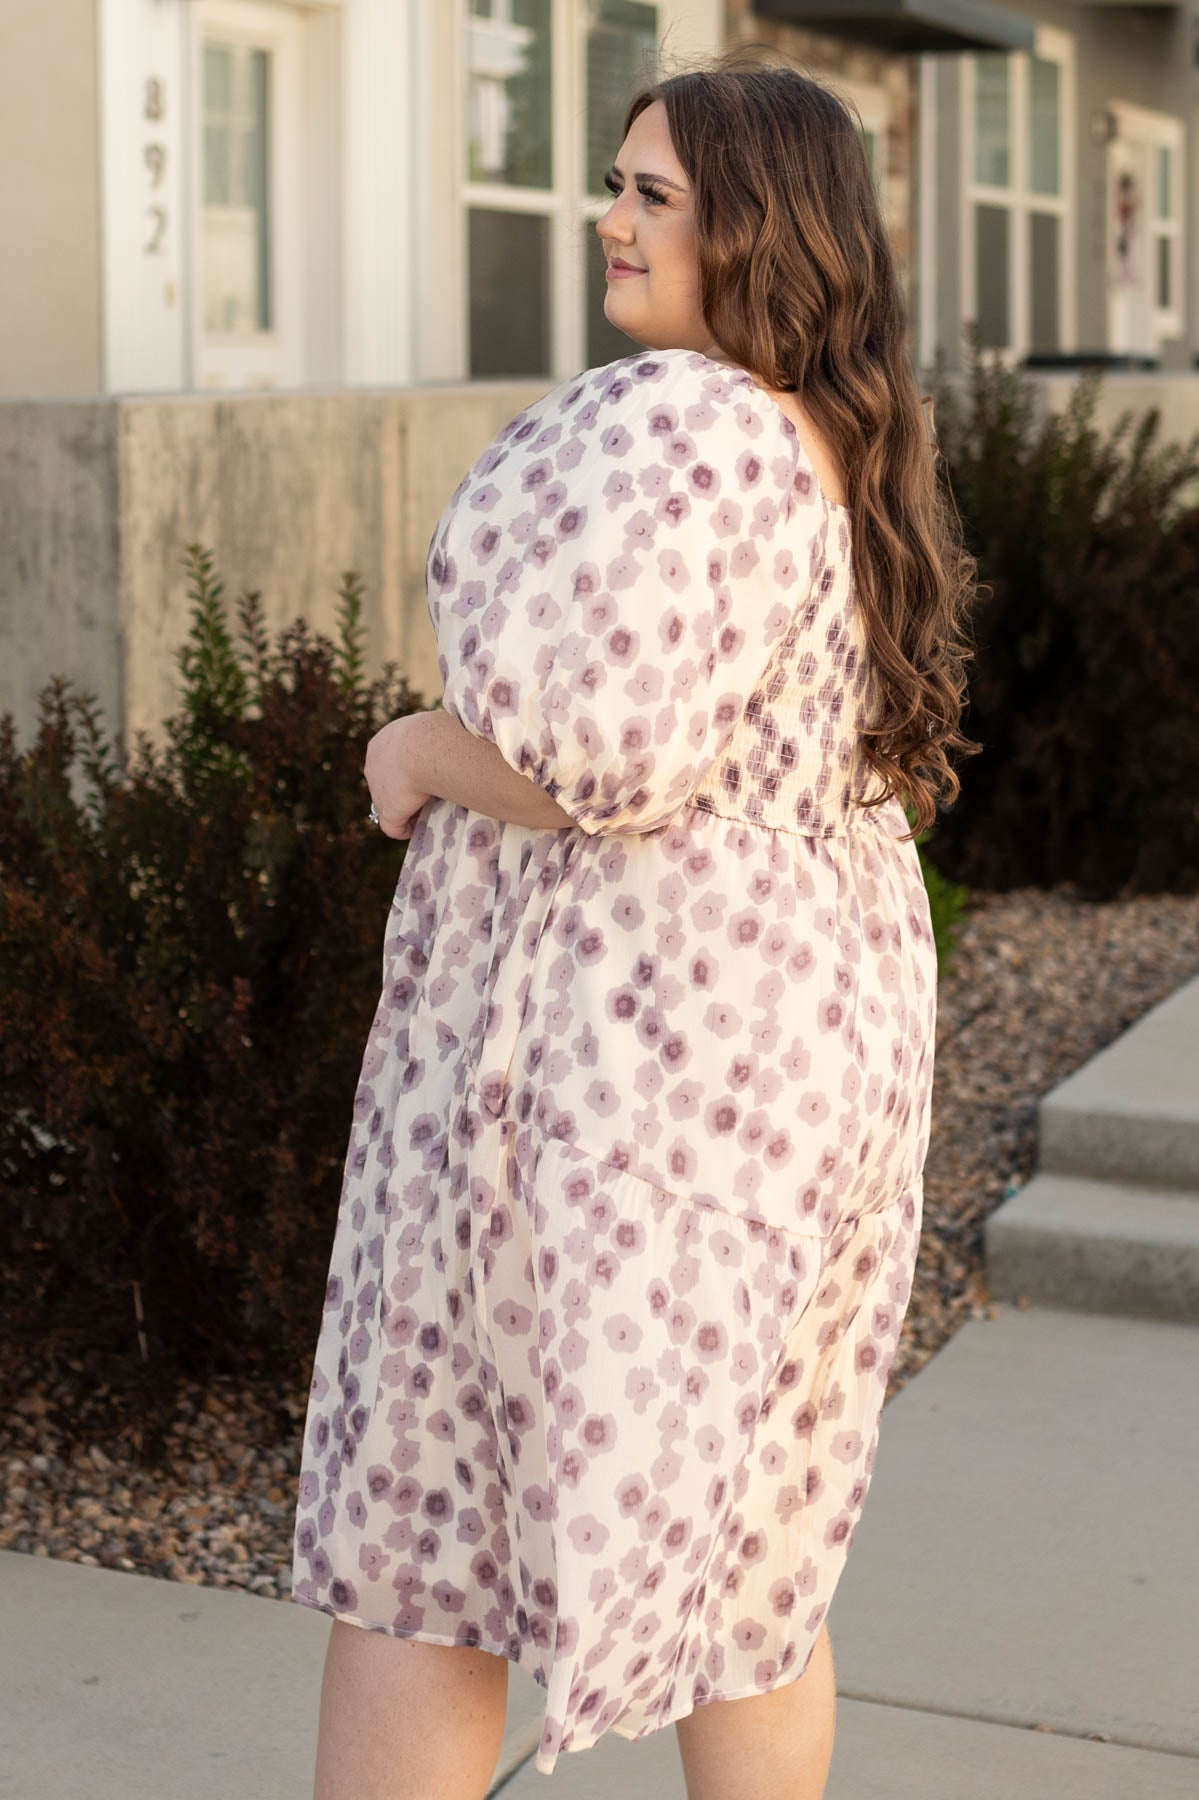 Side view of a short sleeve plus size lavender dress with floral print